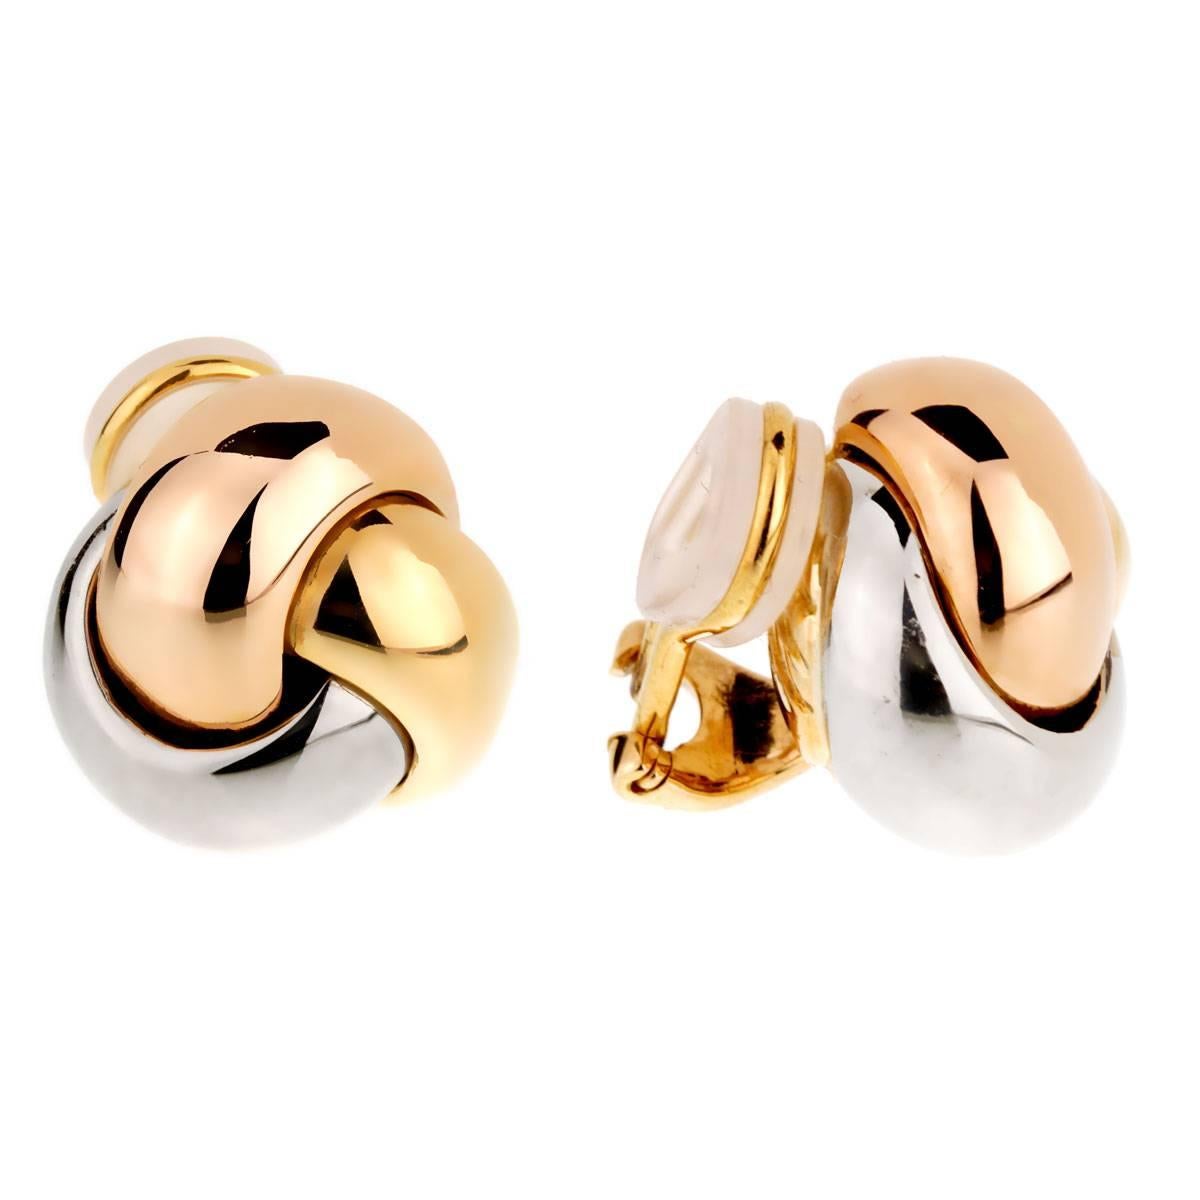 A timeless pair of Cartier Trinity Knot earrings in 18k white, yellow and rose gold.